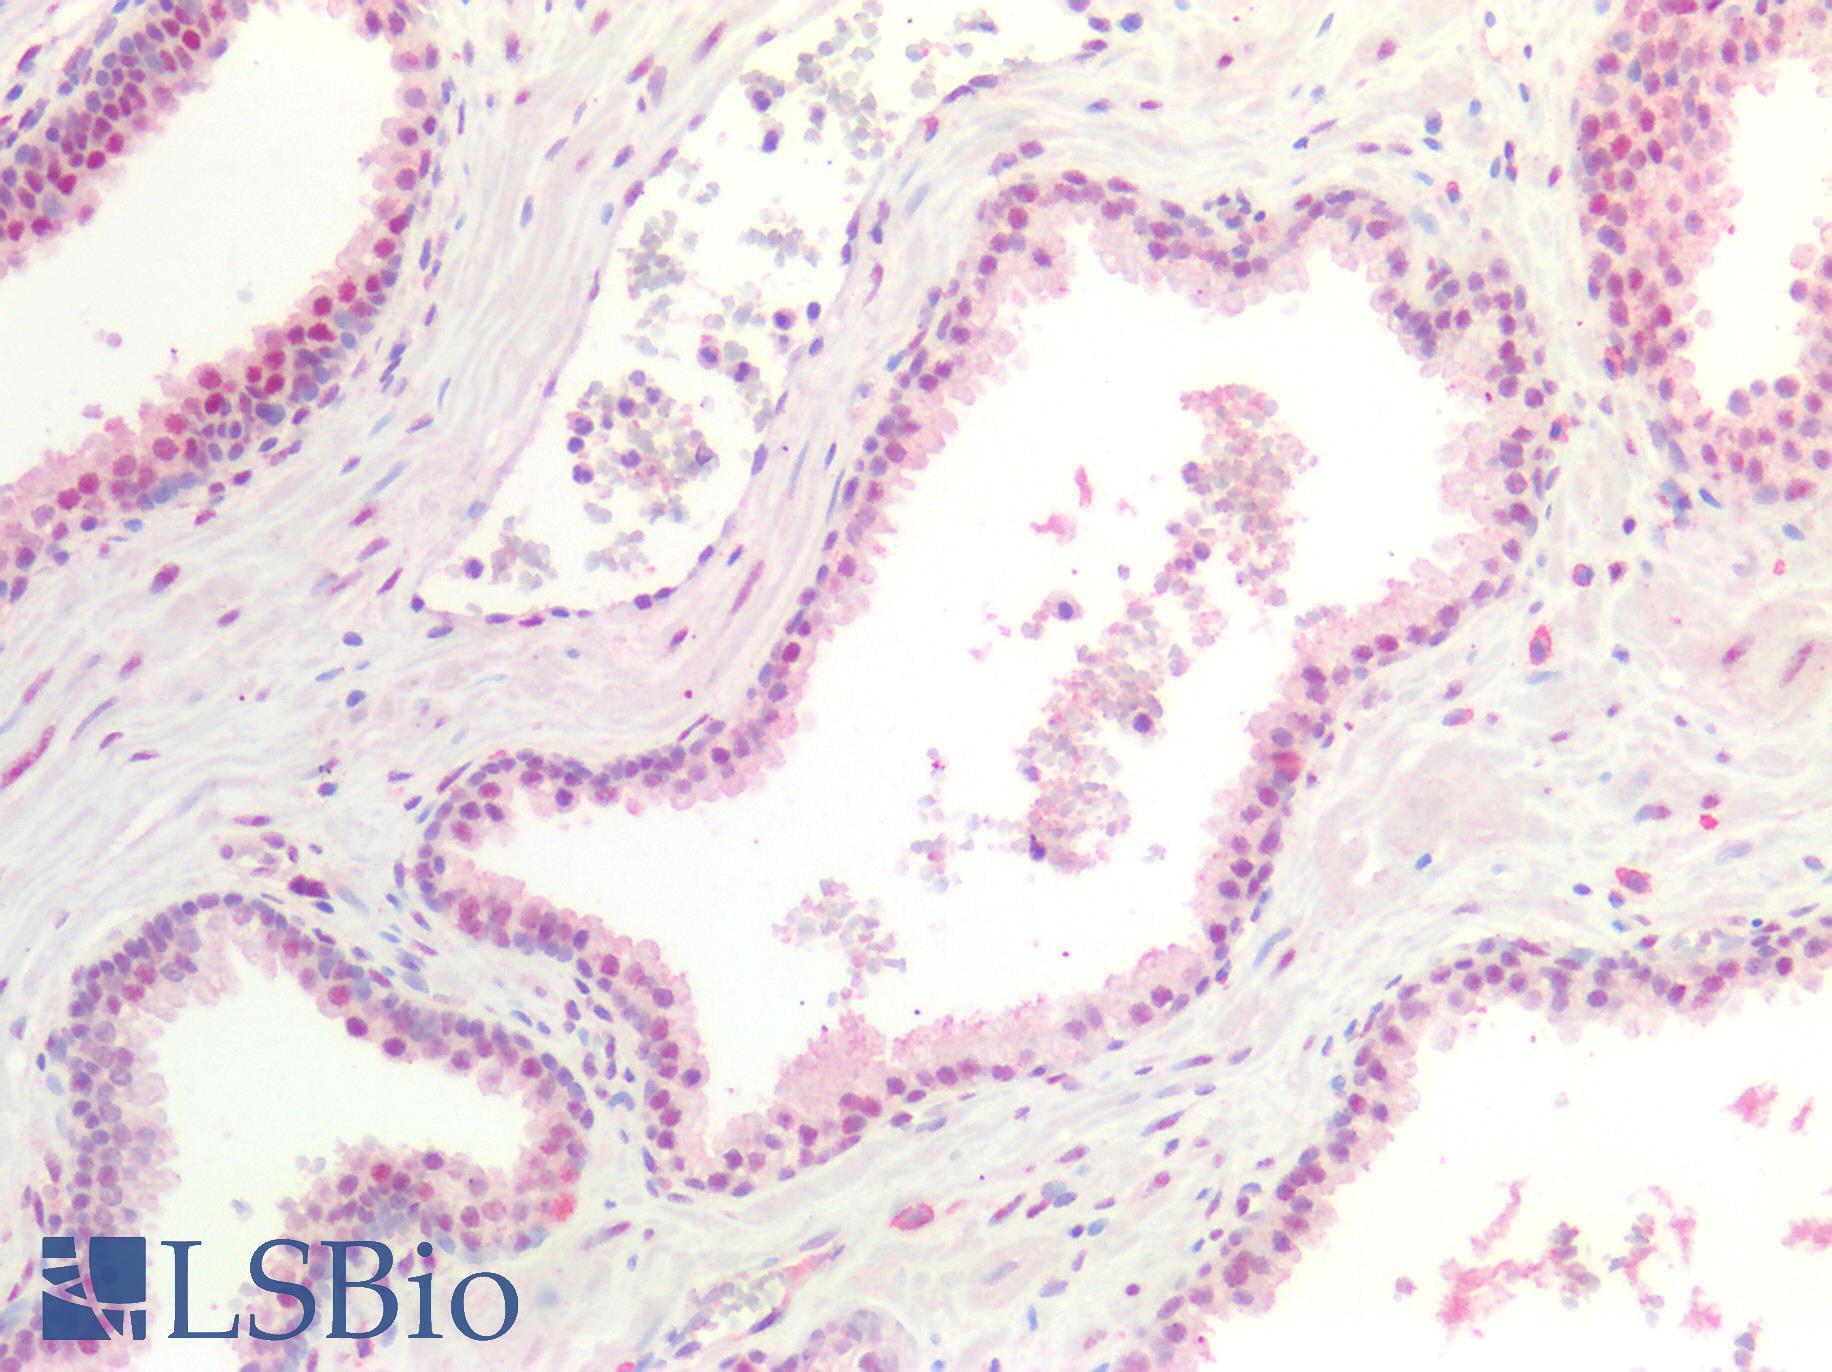 SMAD3 Antibody - Human Prostate: Formalin-Fixed, Paraffin-Embedded (FFPE)